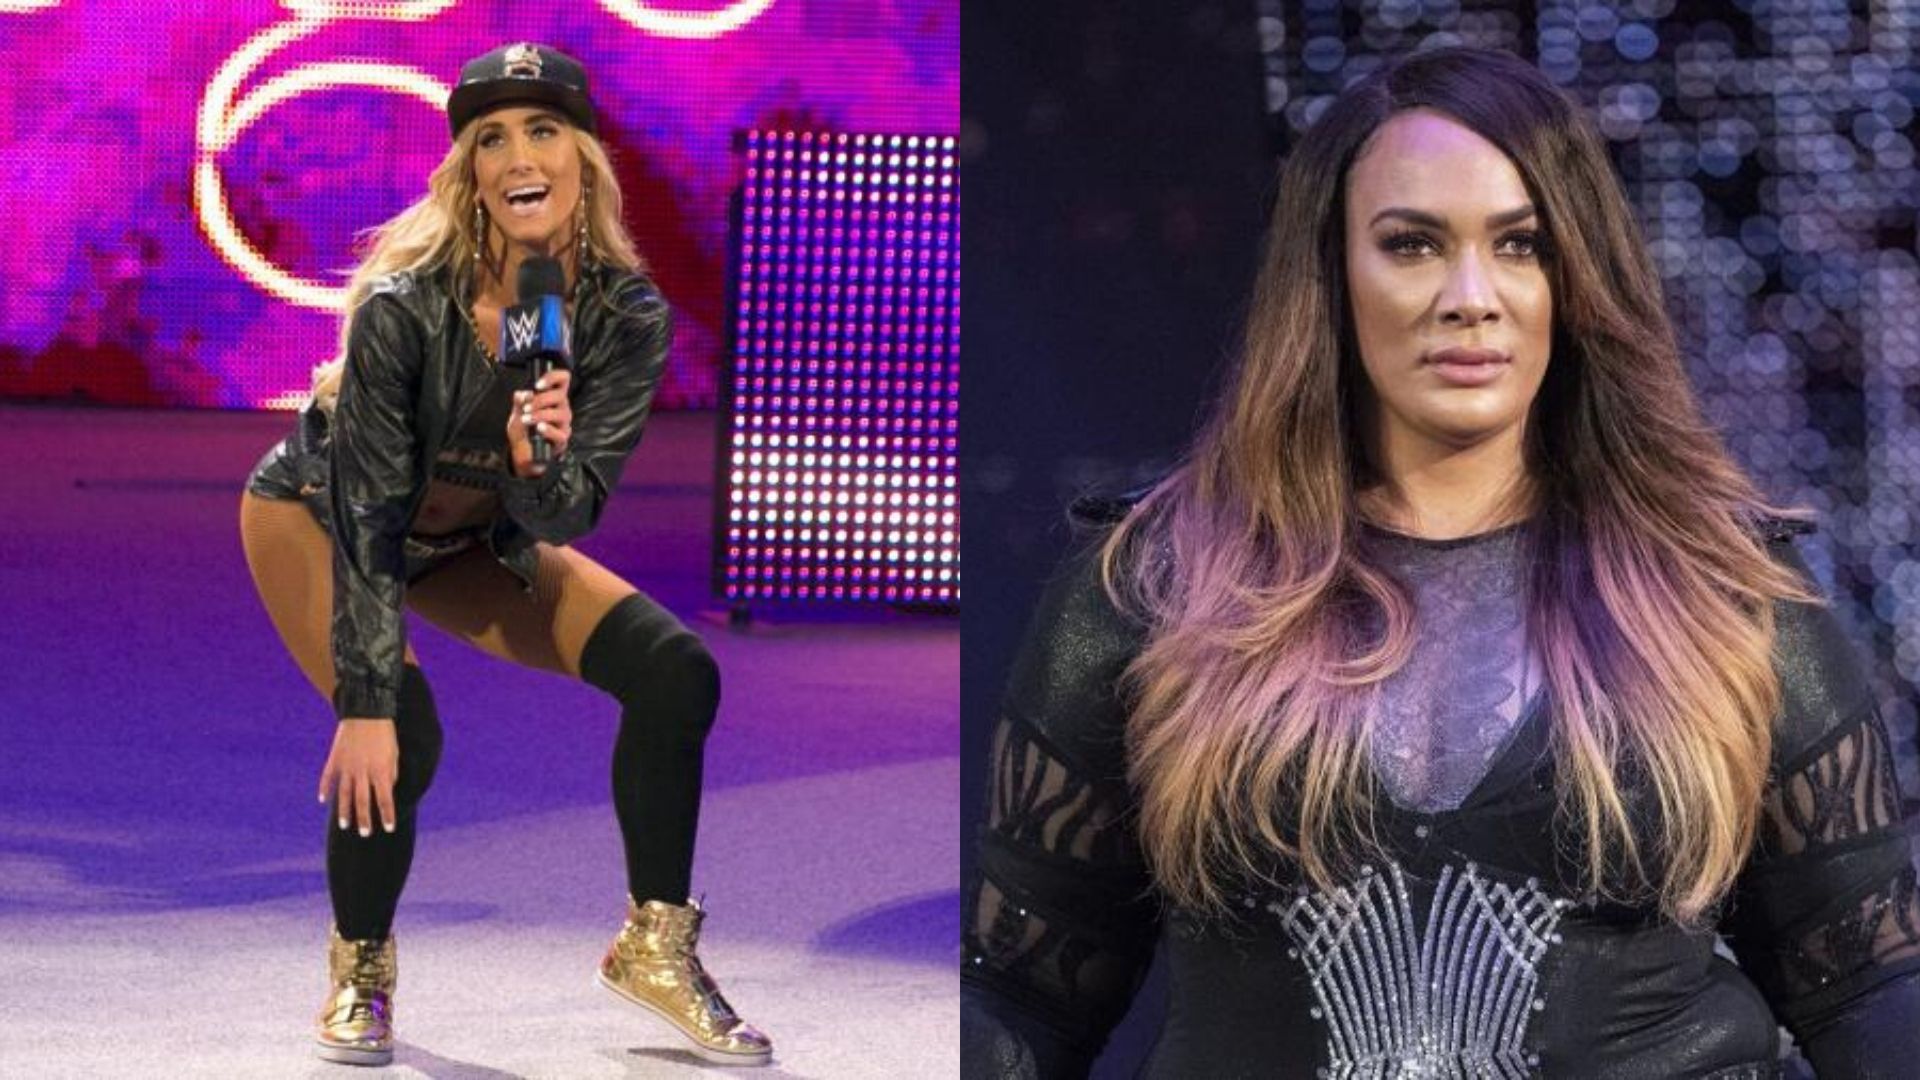 Carmella and nia Jax will face off at Money in the Bank 2020